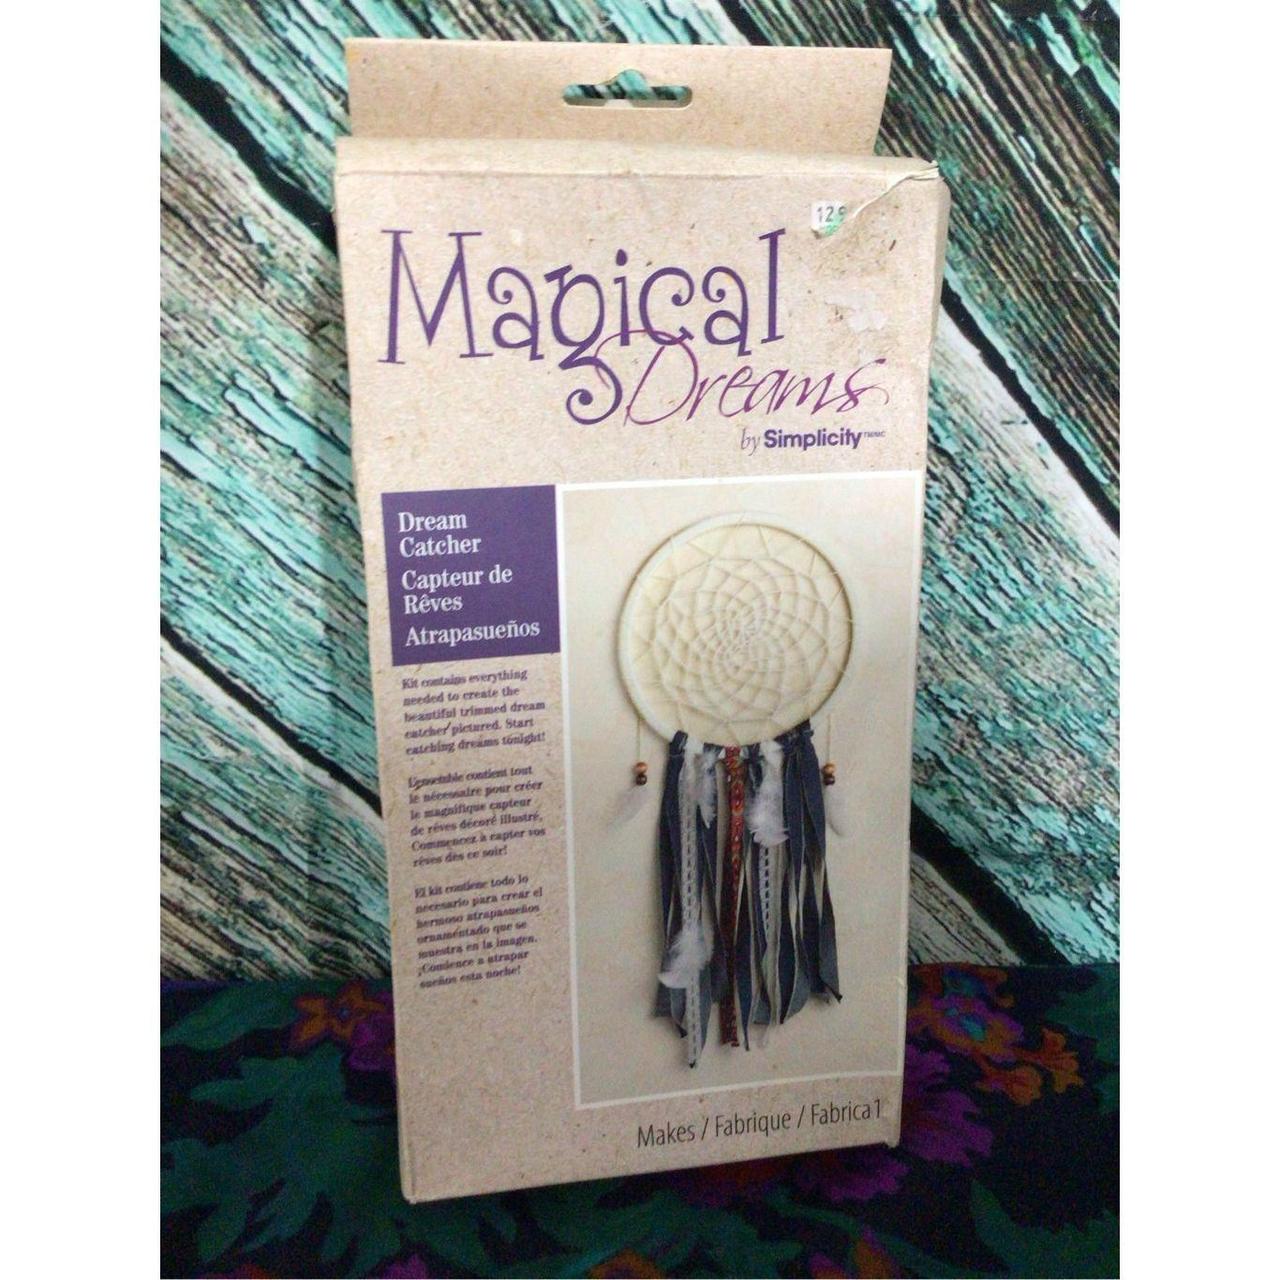 Magical Dreams Dream Catcher: Kit Contains Everything Needed to Create a  Beautifully Trimmed Dream Catcher